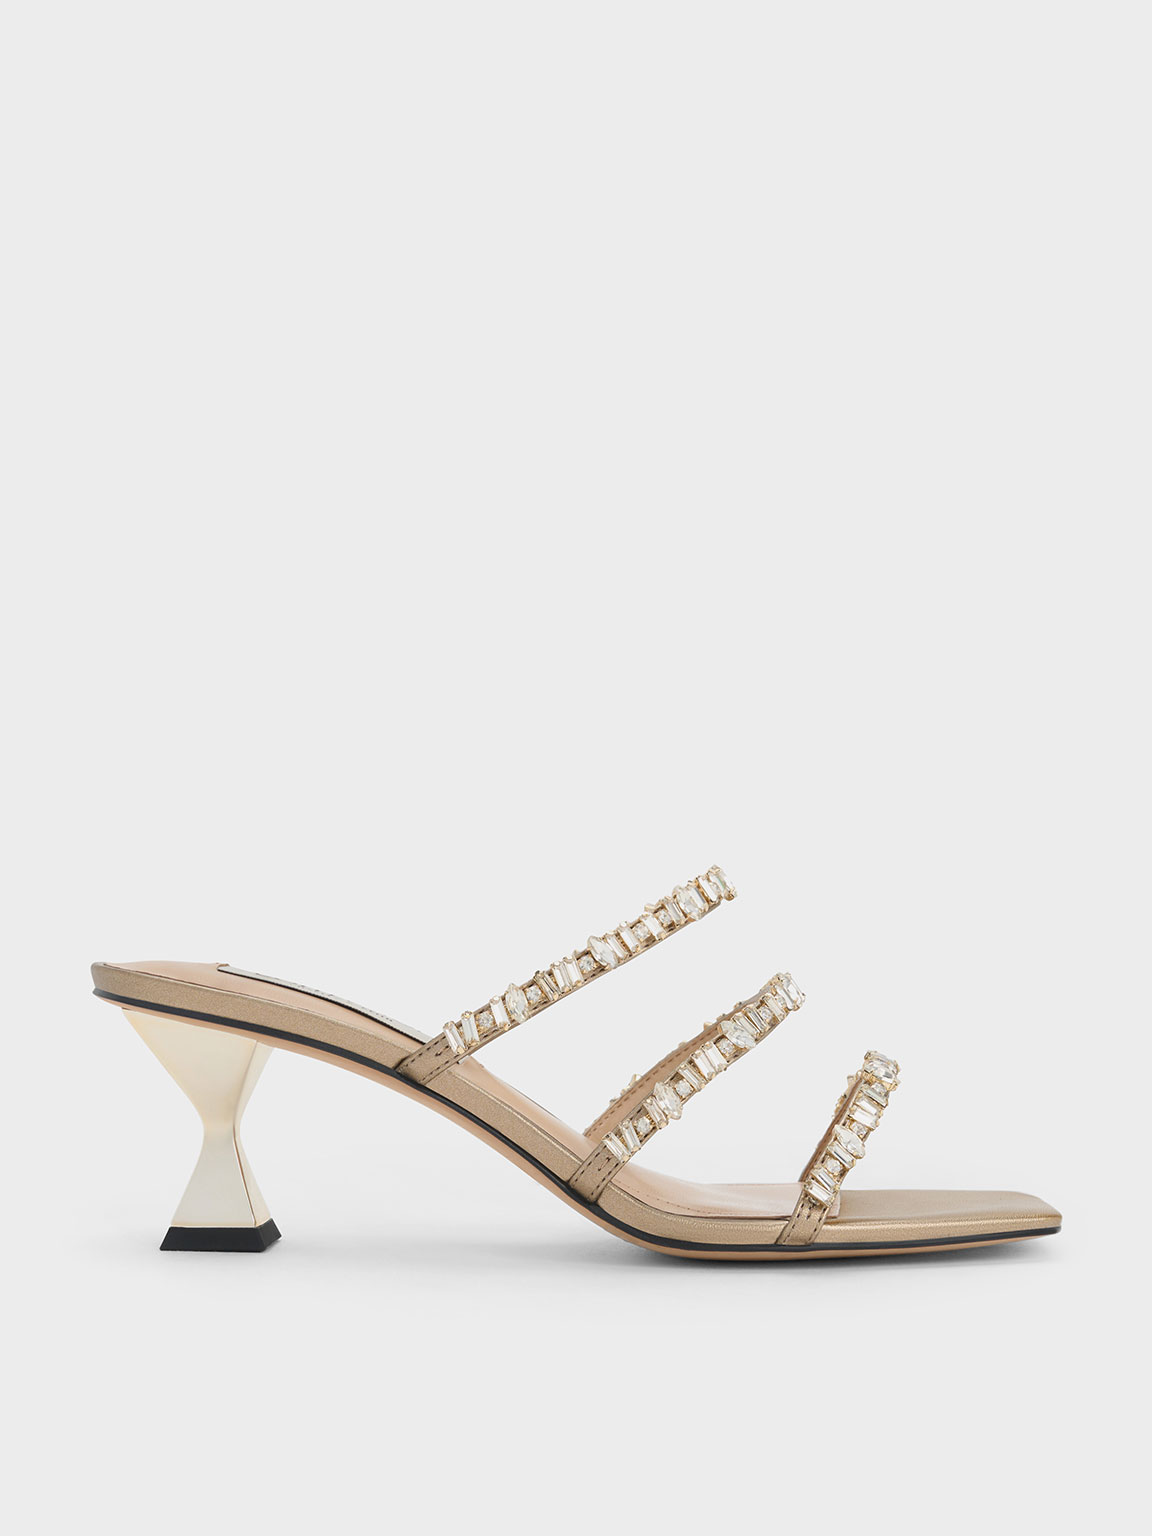 Gold Gem-Encrusted Metallic Strappy Sandals - CHARLES & KEITH MY